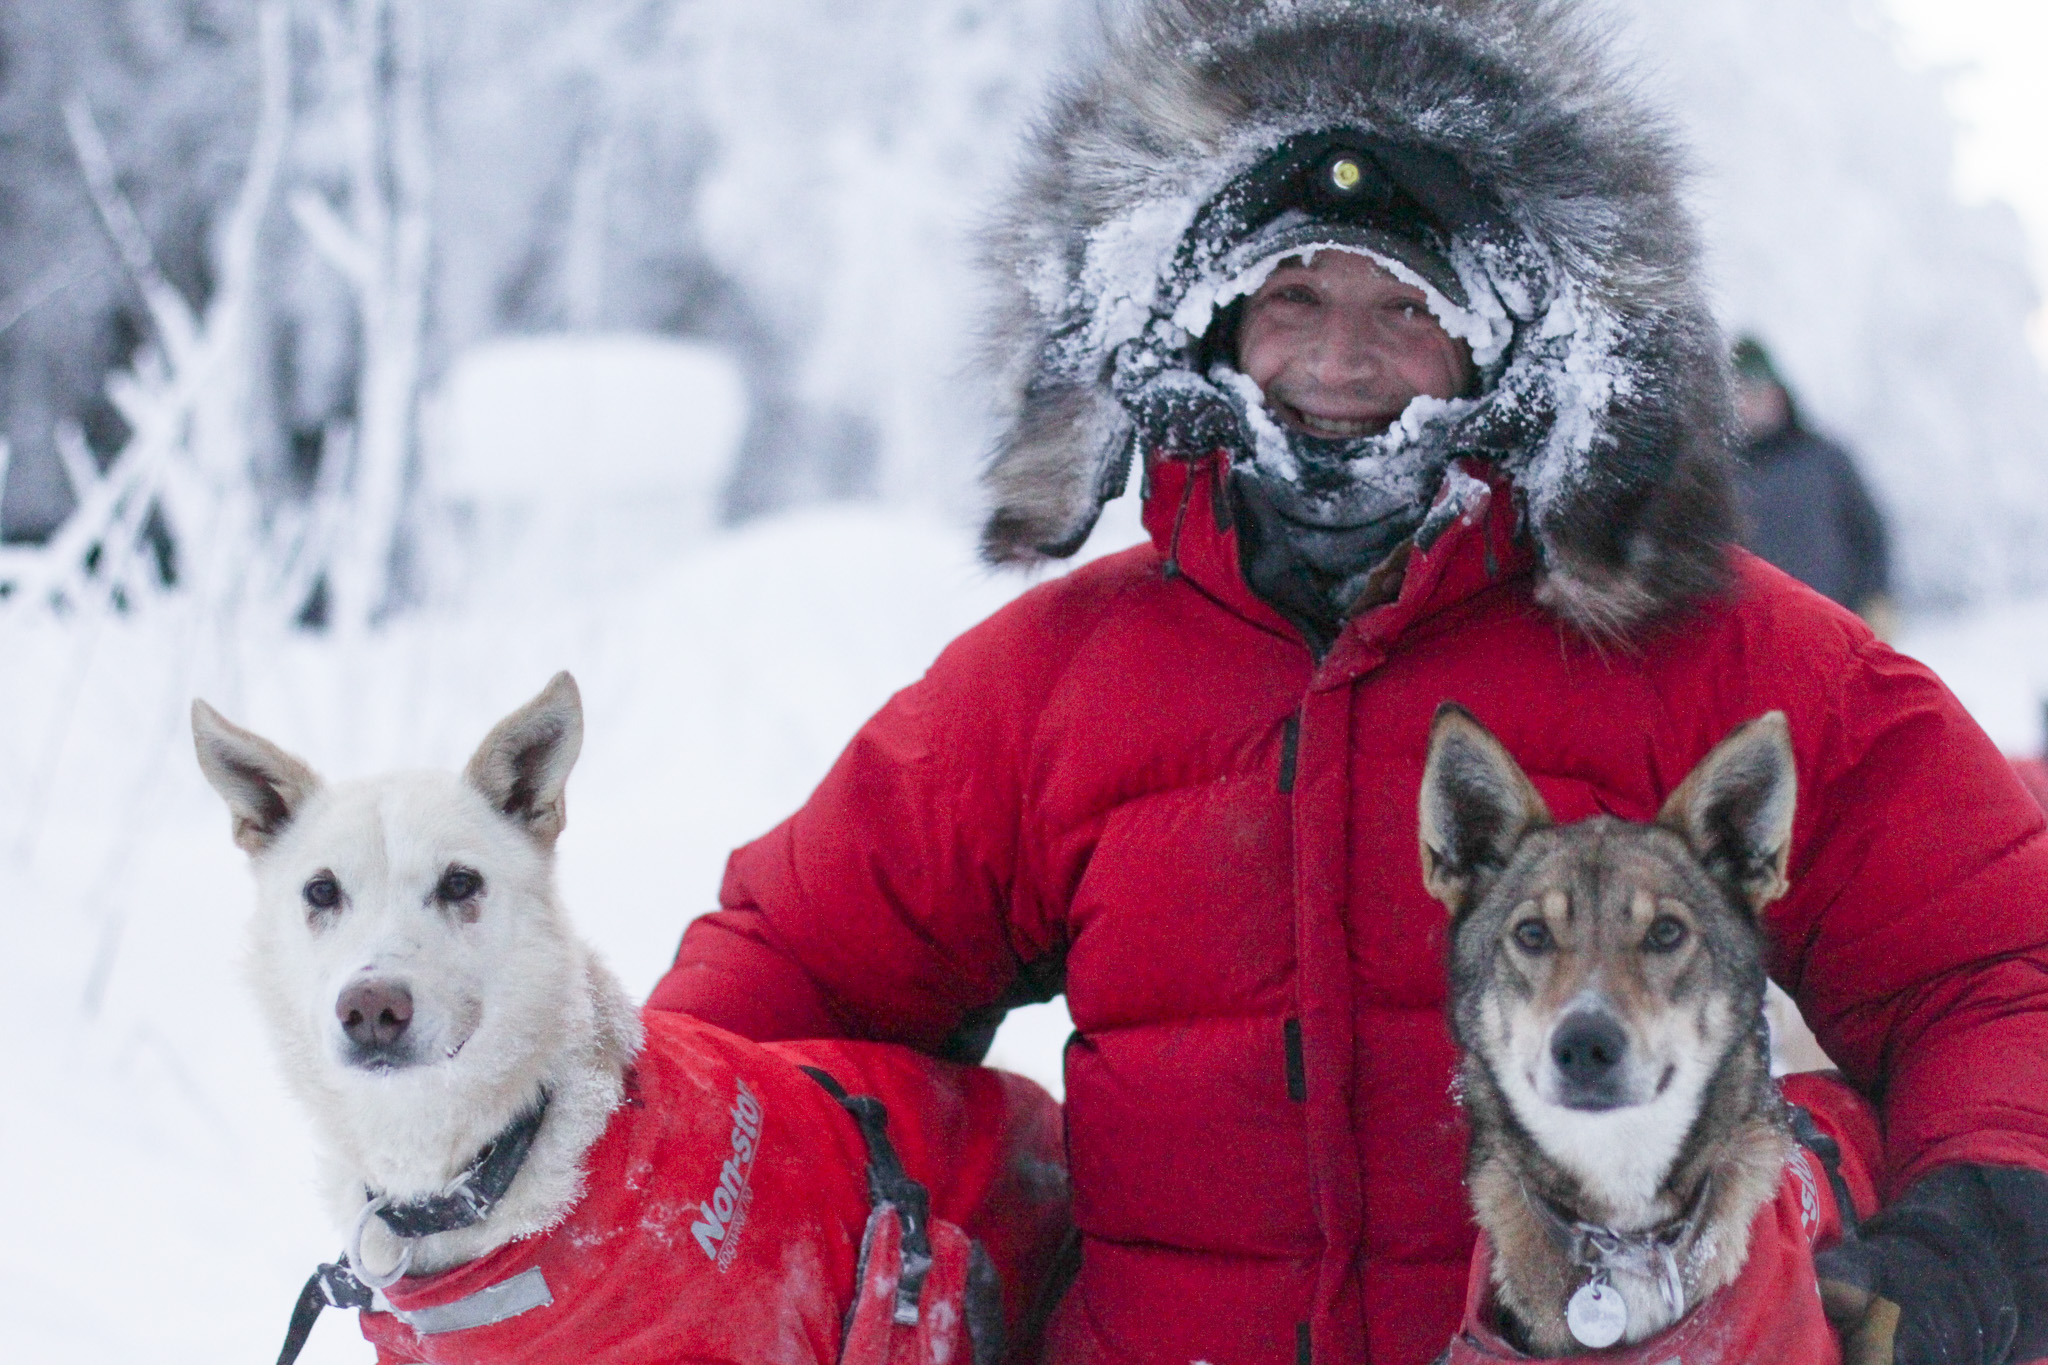 A musher in a red jacket holds two dogs